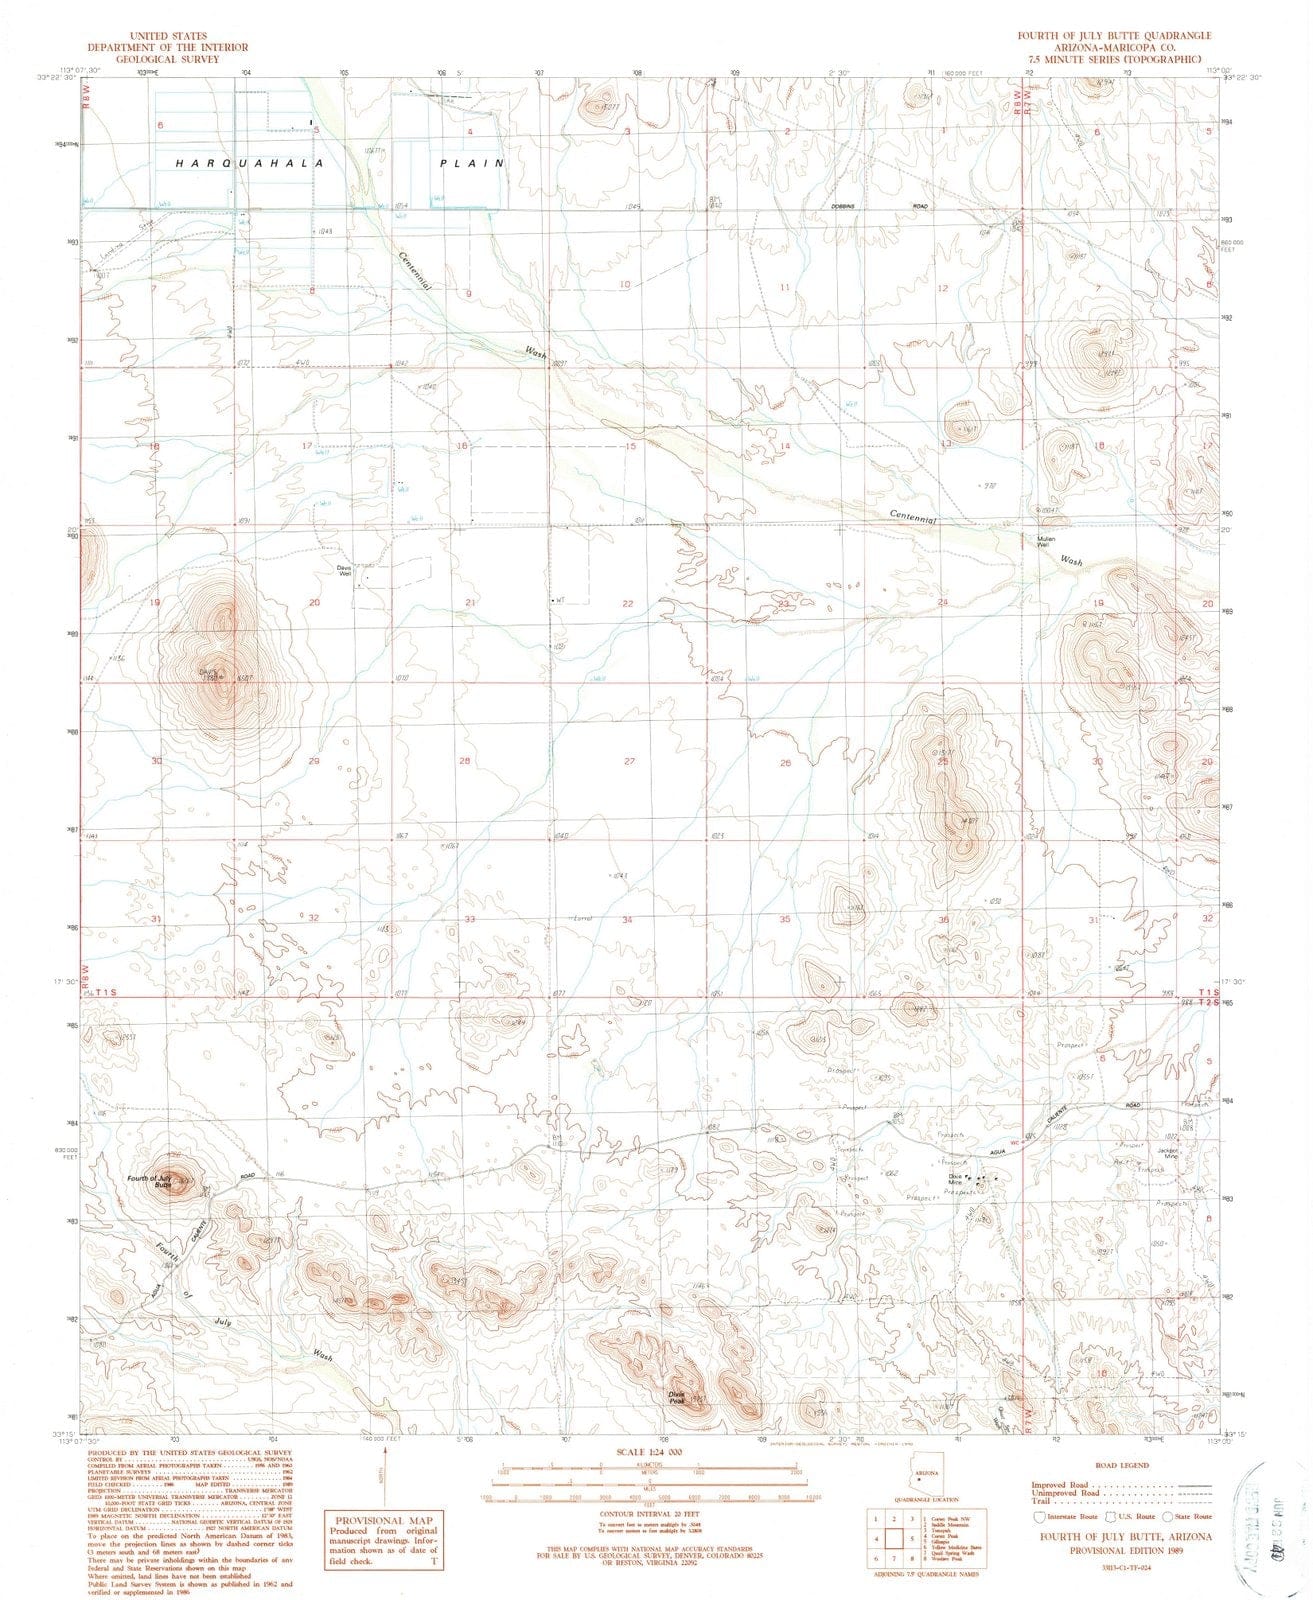 1989 Fourth of July Butte, AZ - Arizona - USGS Topographic Map